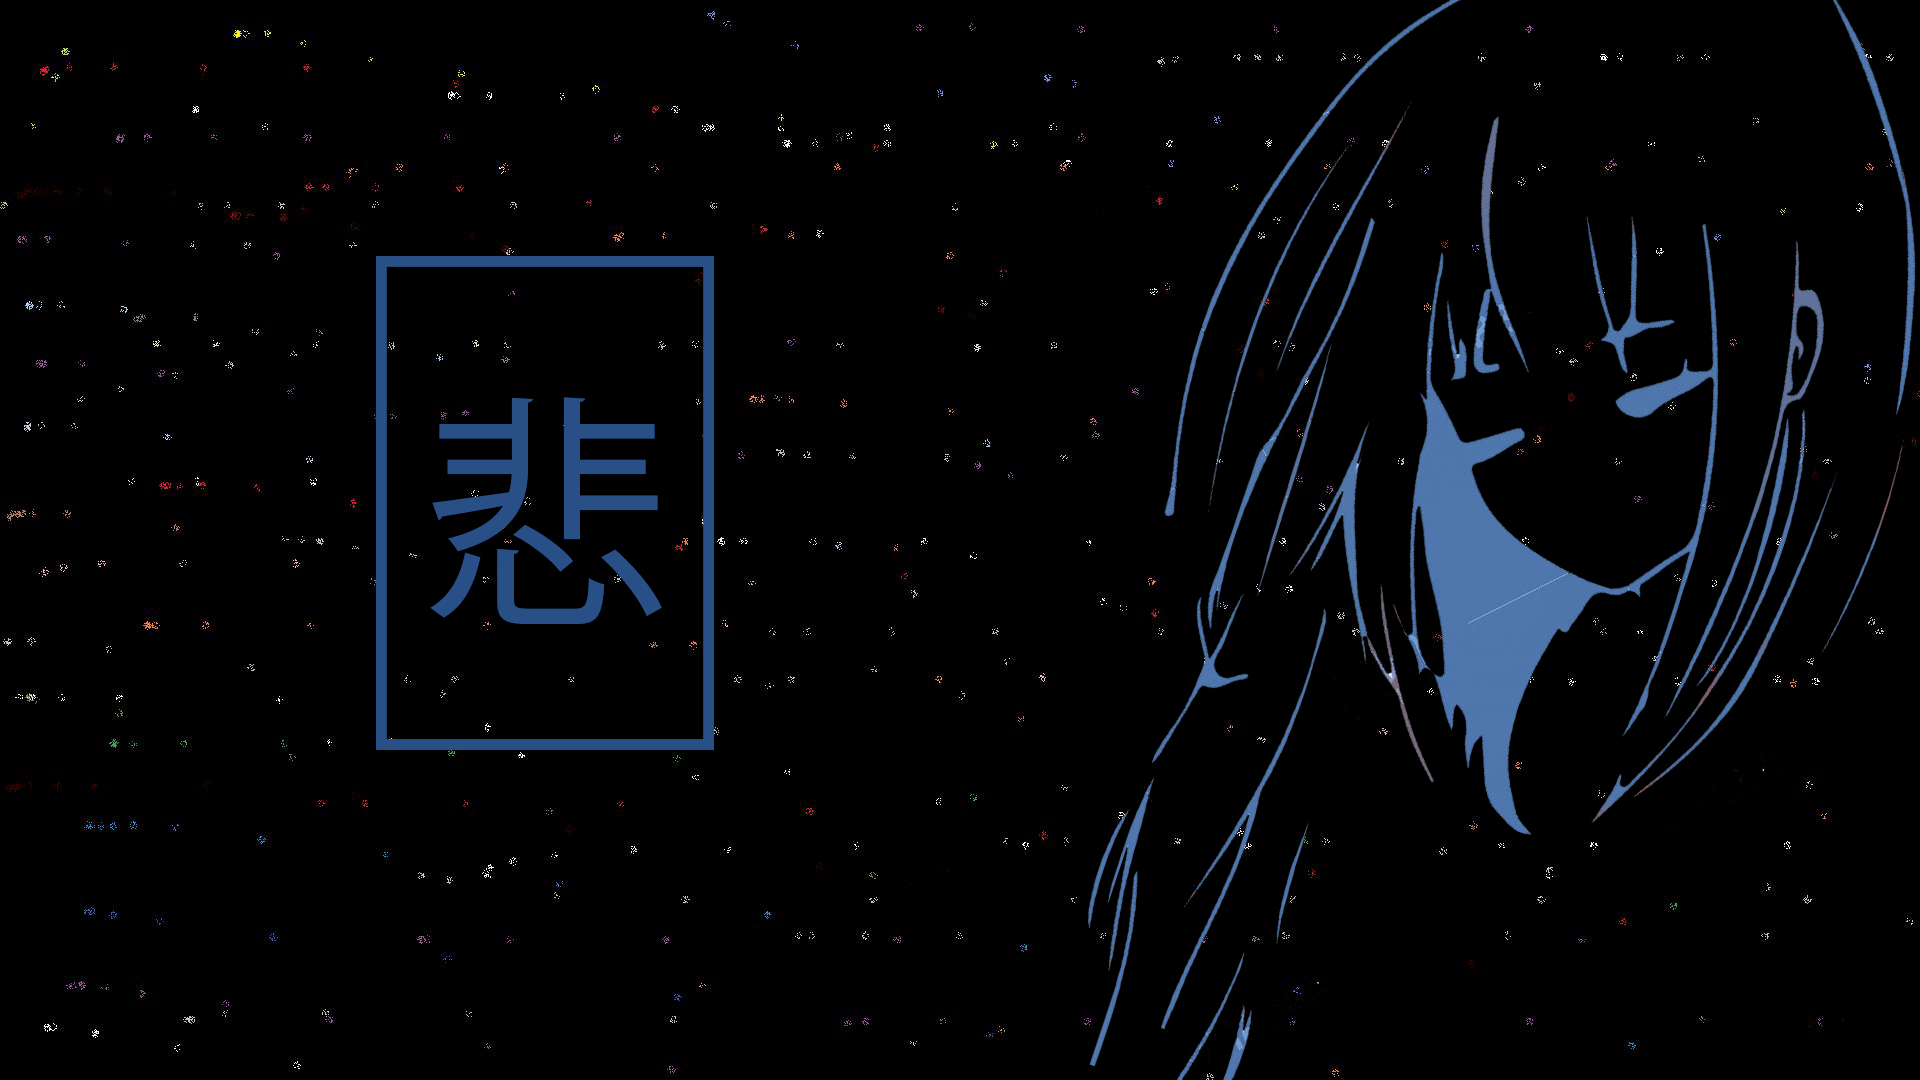 A silhouette of a girl with blue hair and a blue shirt, looking off to the right of the image. The background is a black field with white speckles. To the left of the silhouette is a box with the kanji for 